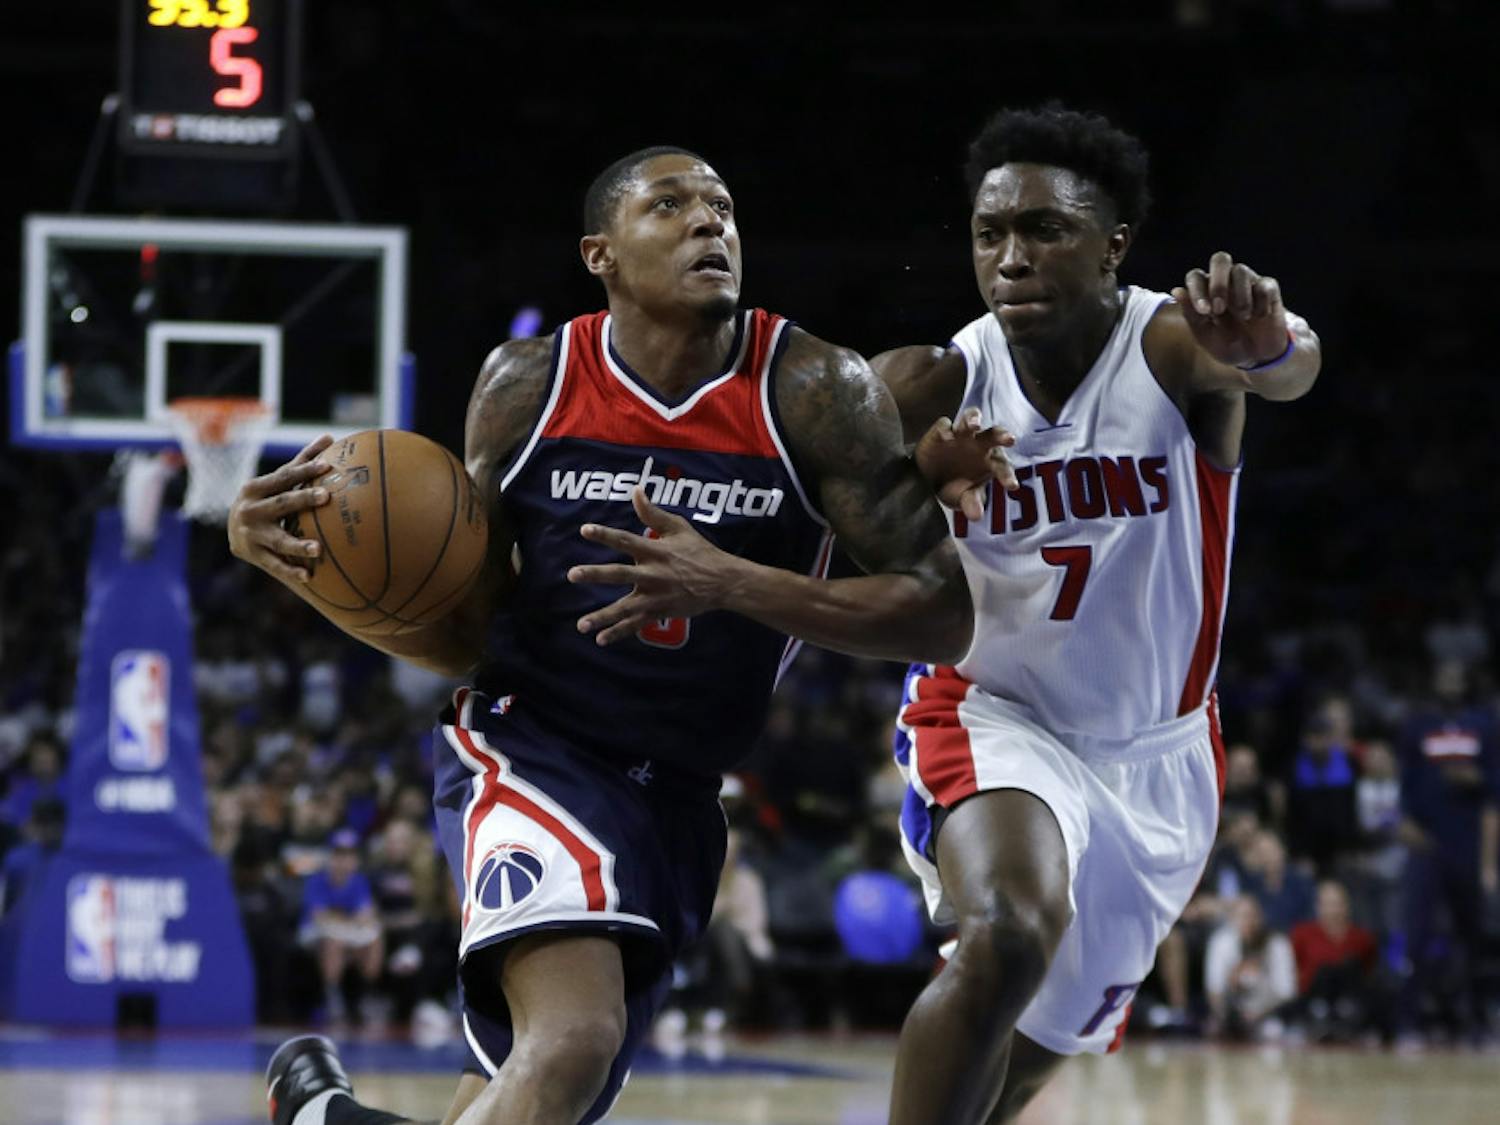 Washington Wizards guard Bradley Beal (3) drives on Detroit Pistons forward Stanley Johnson (7) during second half of an NBA basketball game, Monday, April 10, 2017, in Auburn Hills, Mich. (AP Photo/Carlos Osorio)